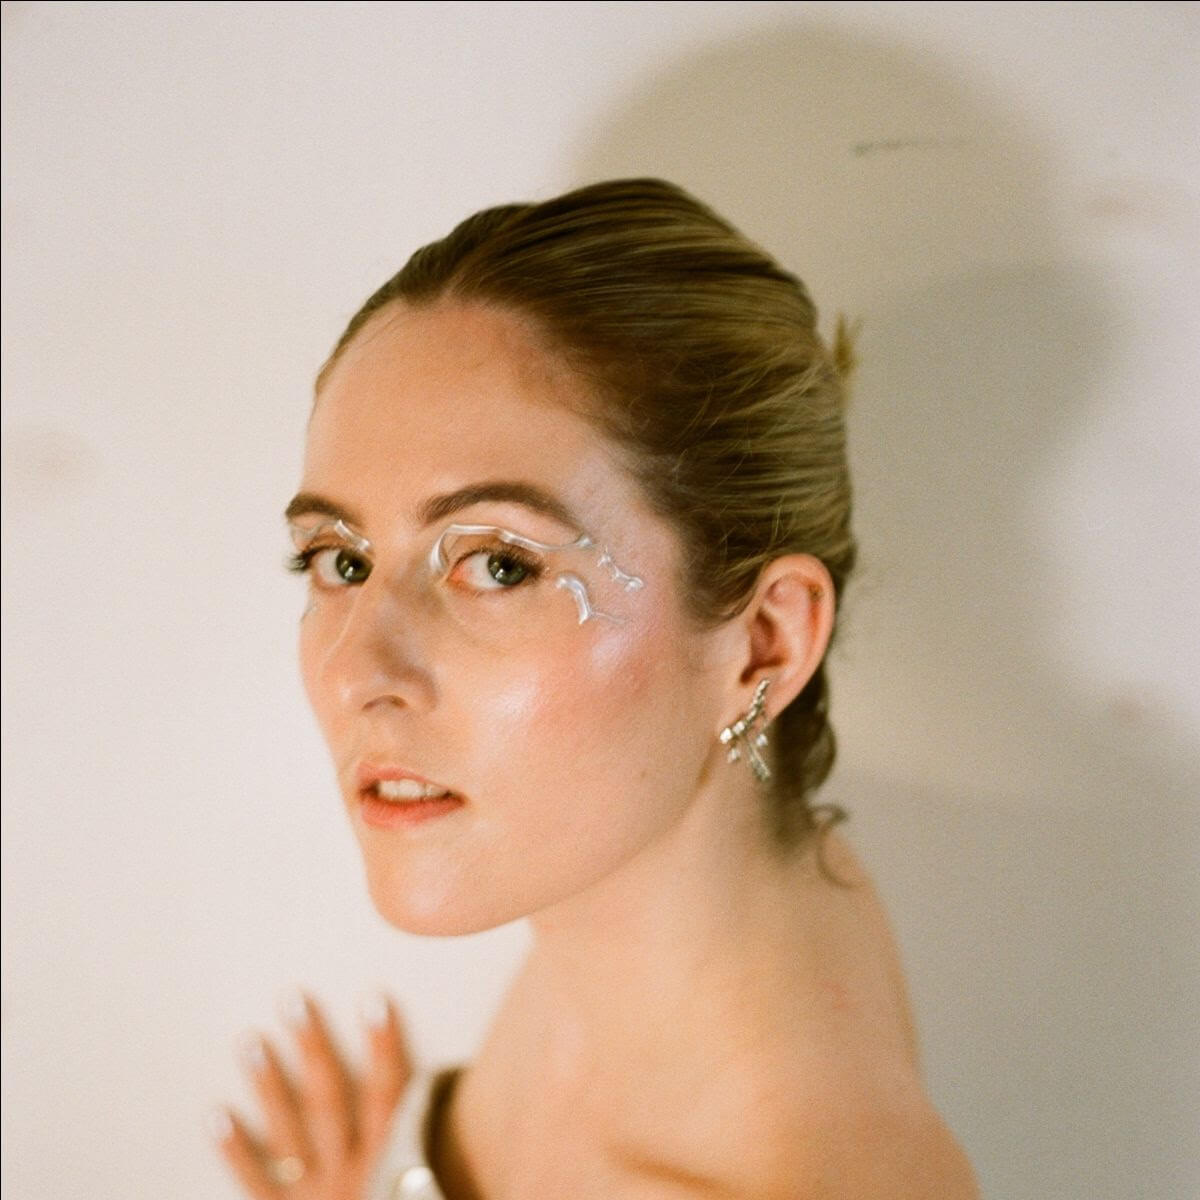 WILDES has announced her new EP Subsidence will be released on March 15th and has shared its lead single "heartbreak is silent"